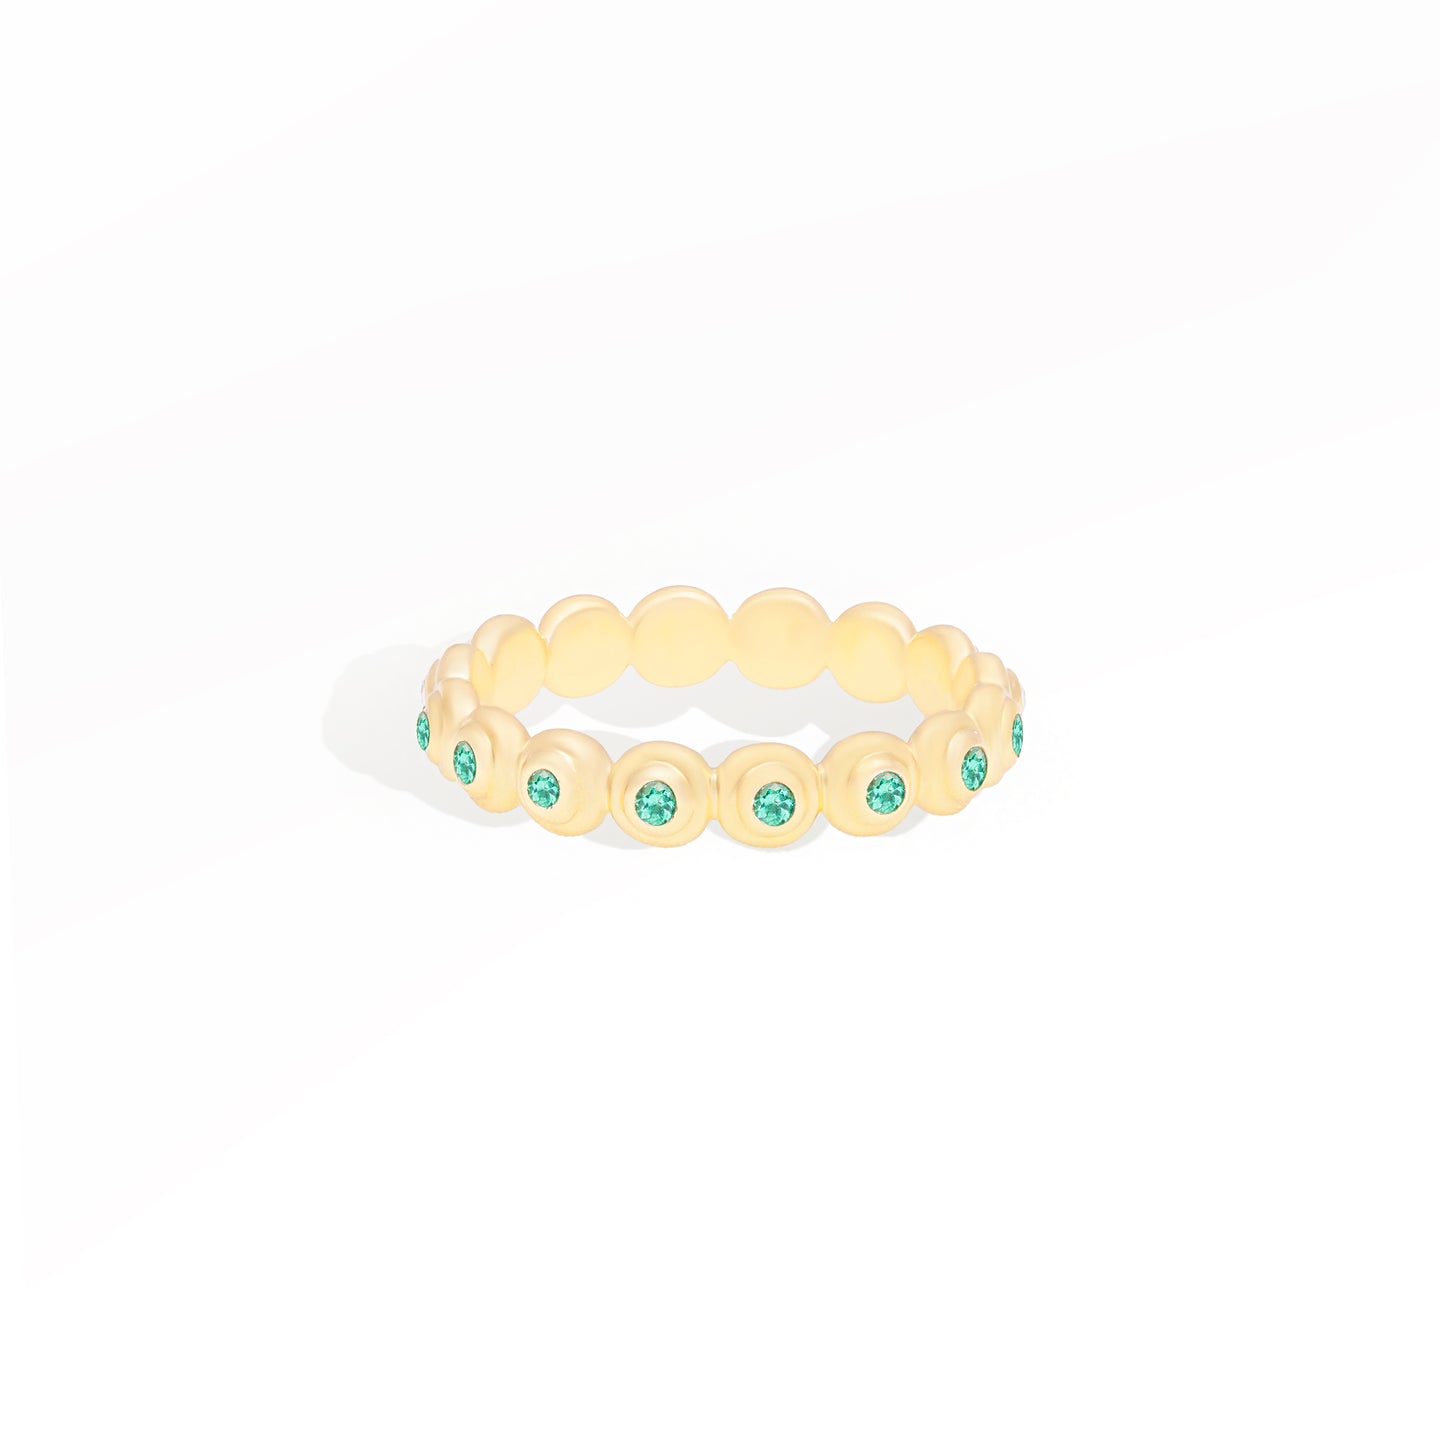 Evolve Stacking Ring - Small (Emerald)